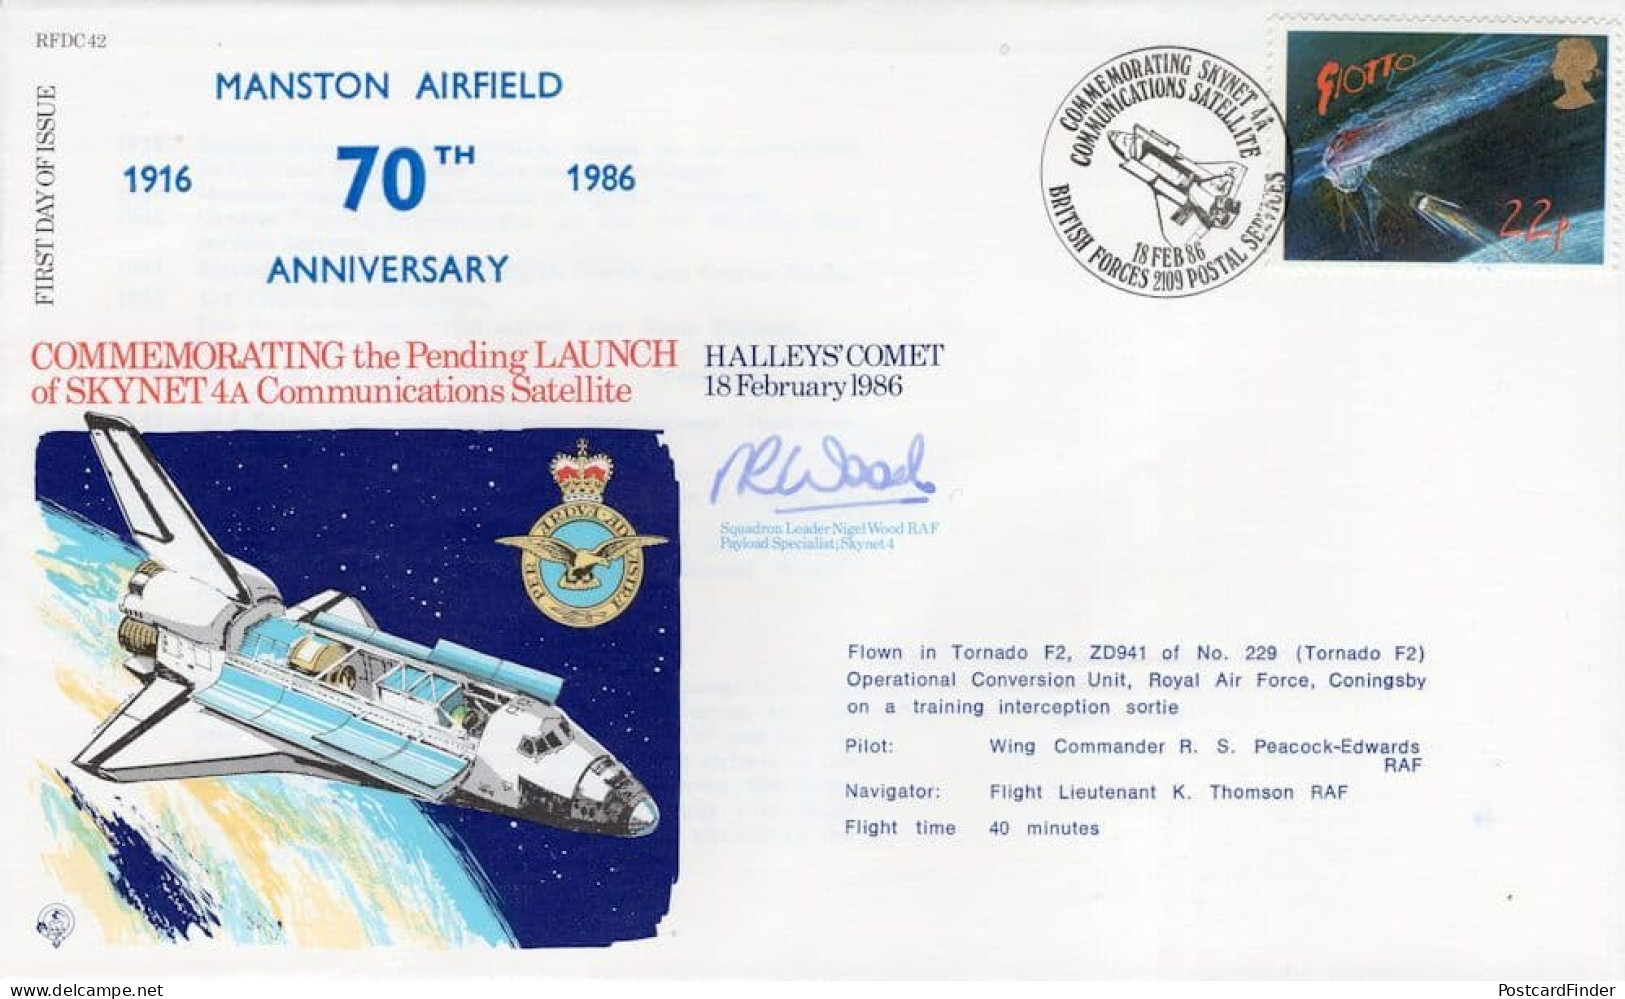 Halley's Comet Manston Airfield 1916 Anniversary Hand Signed FDC - Militaria